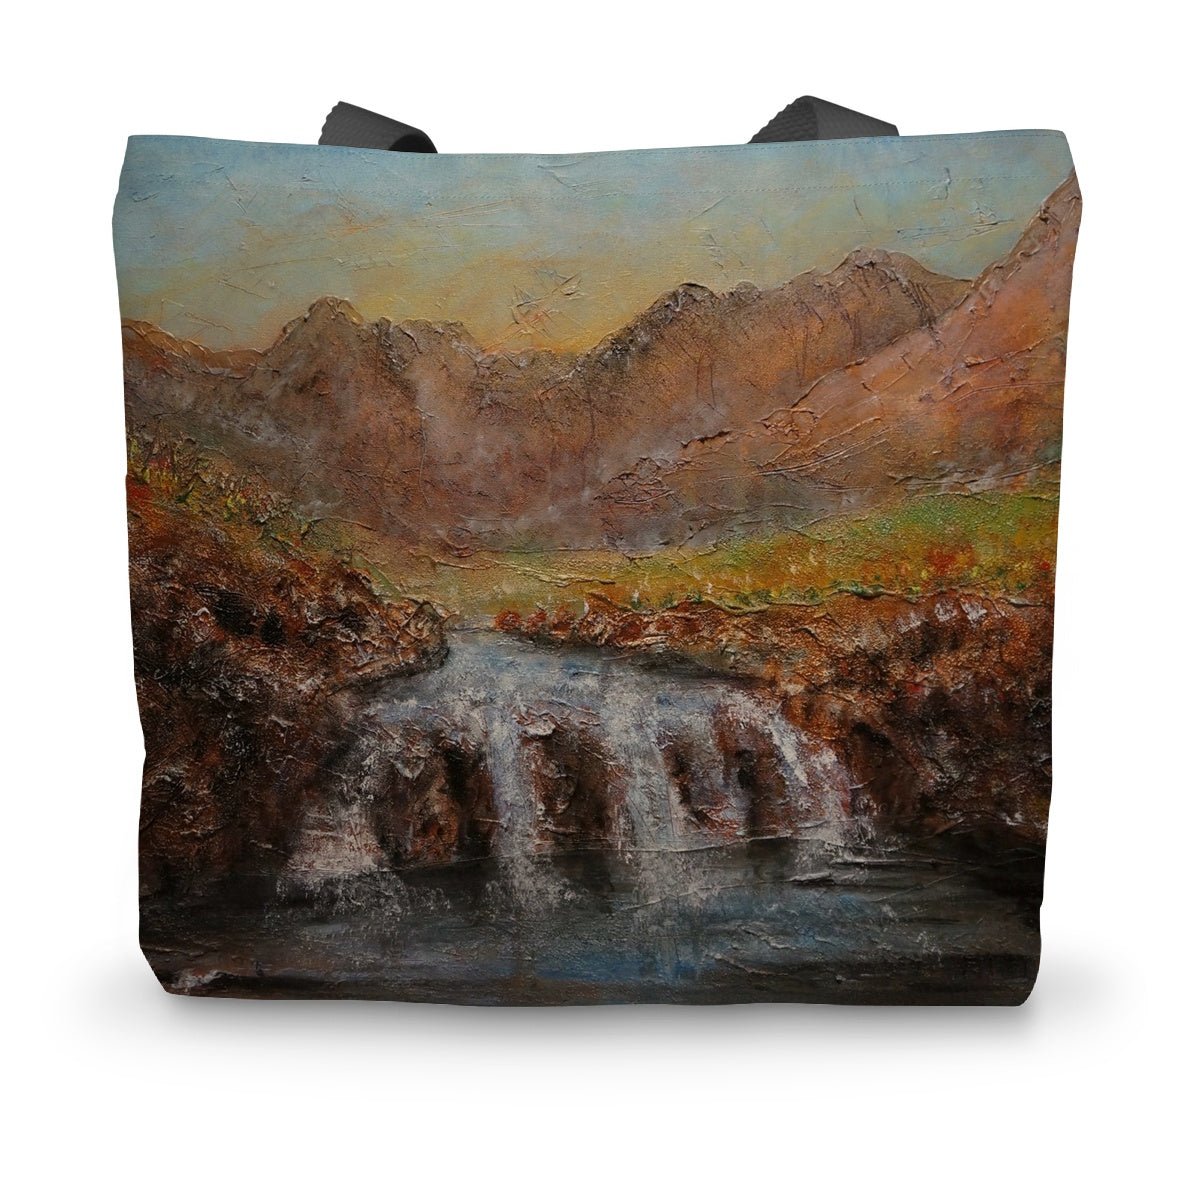 Fairy Pools Dawn Skye Art Gifts Canvas Tote Bag-Bags-Skye Art Gallery-14"x18.5"-Paintings, Prints, Homeware, Art Gifts From Scotland By Scottish Artist Kevin Hunter